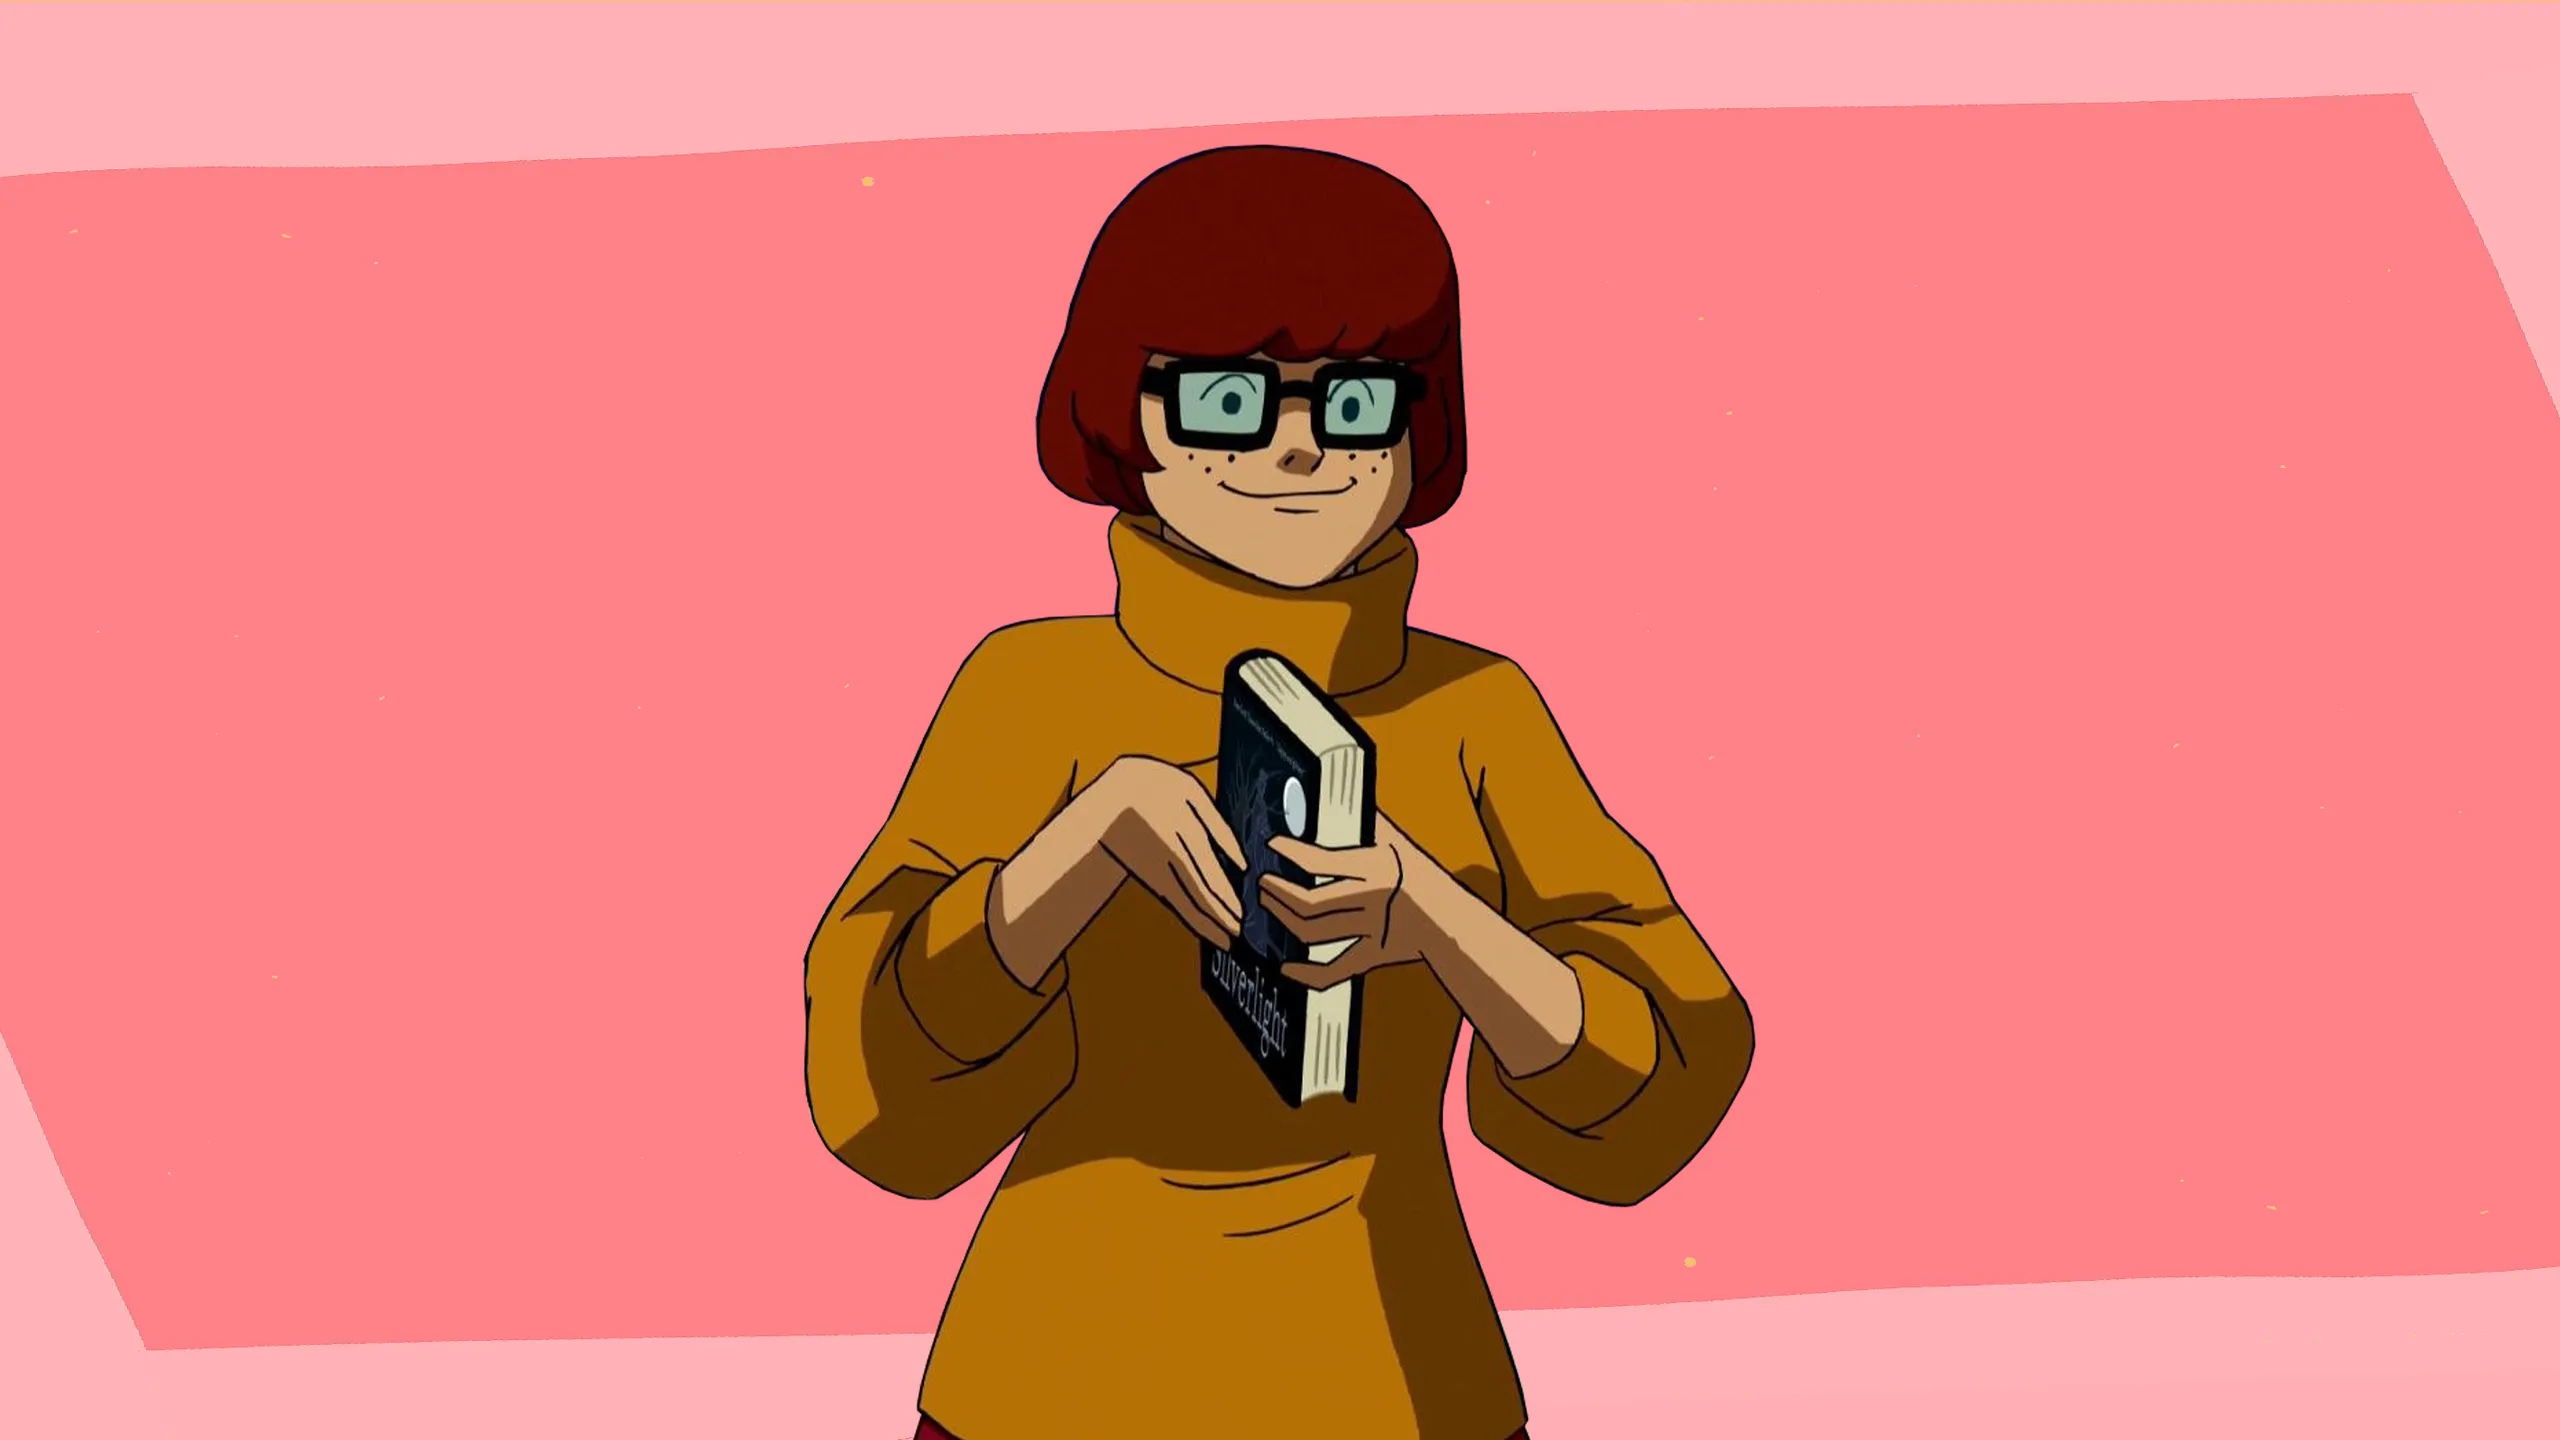 All you need to know about Velma and Scooby-Doo franchise